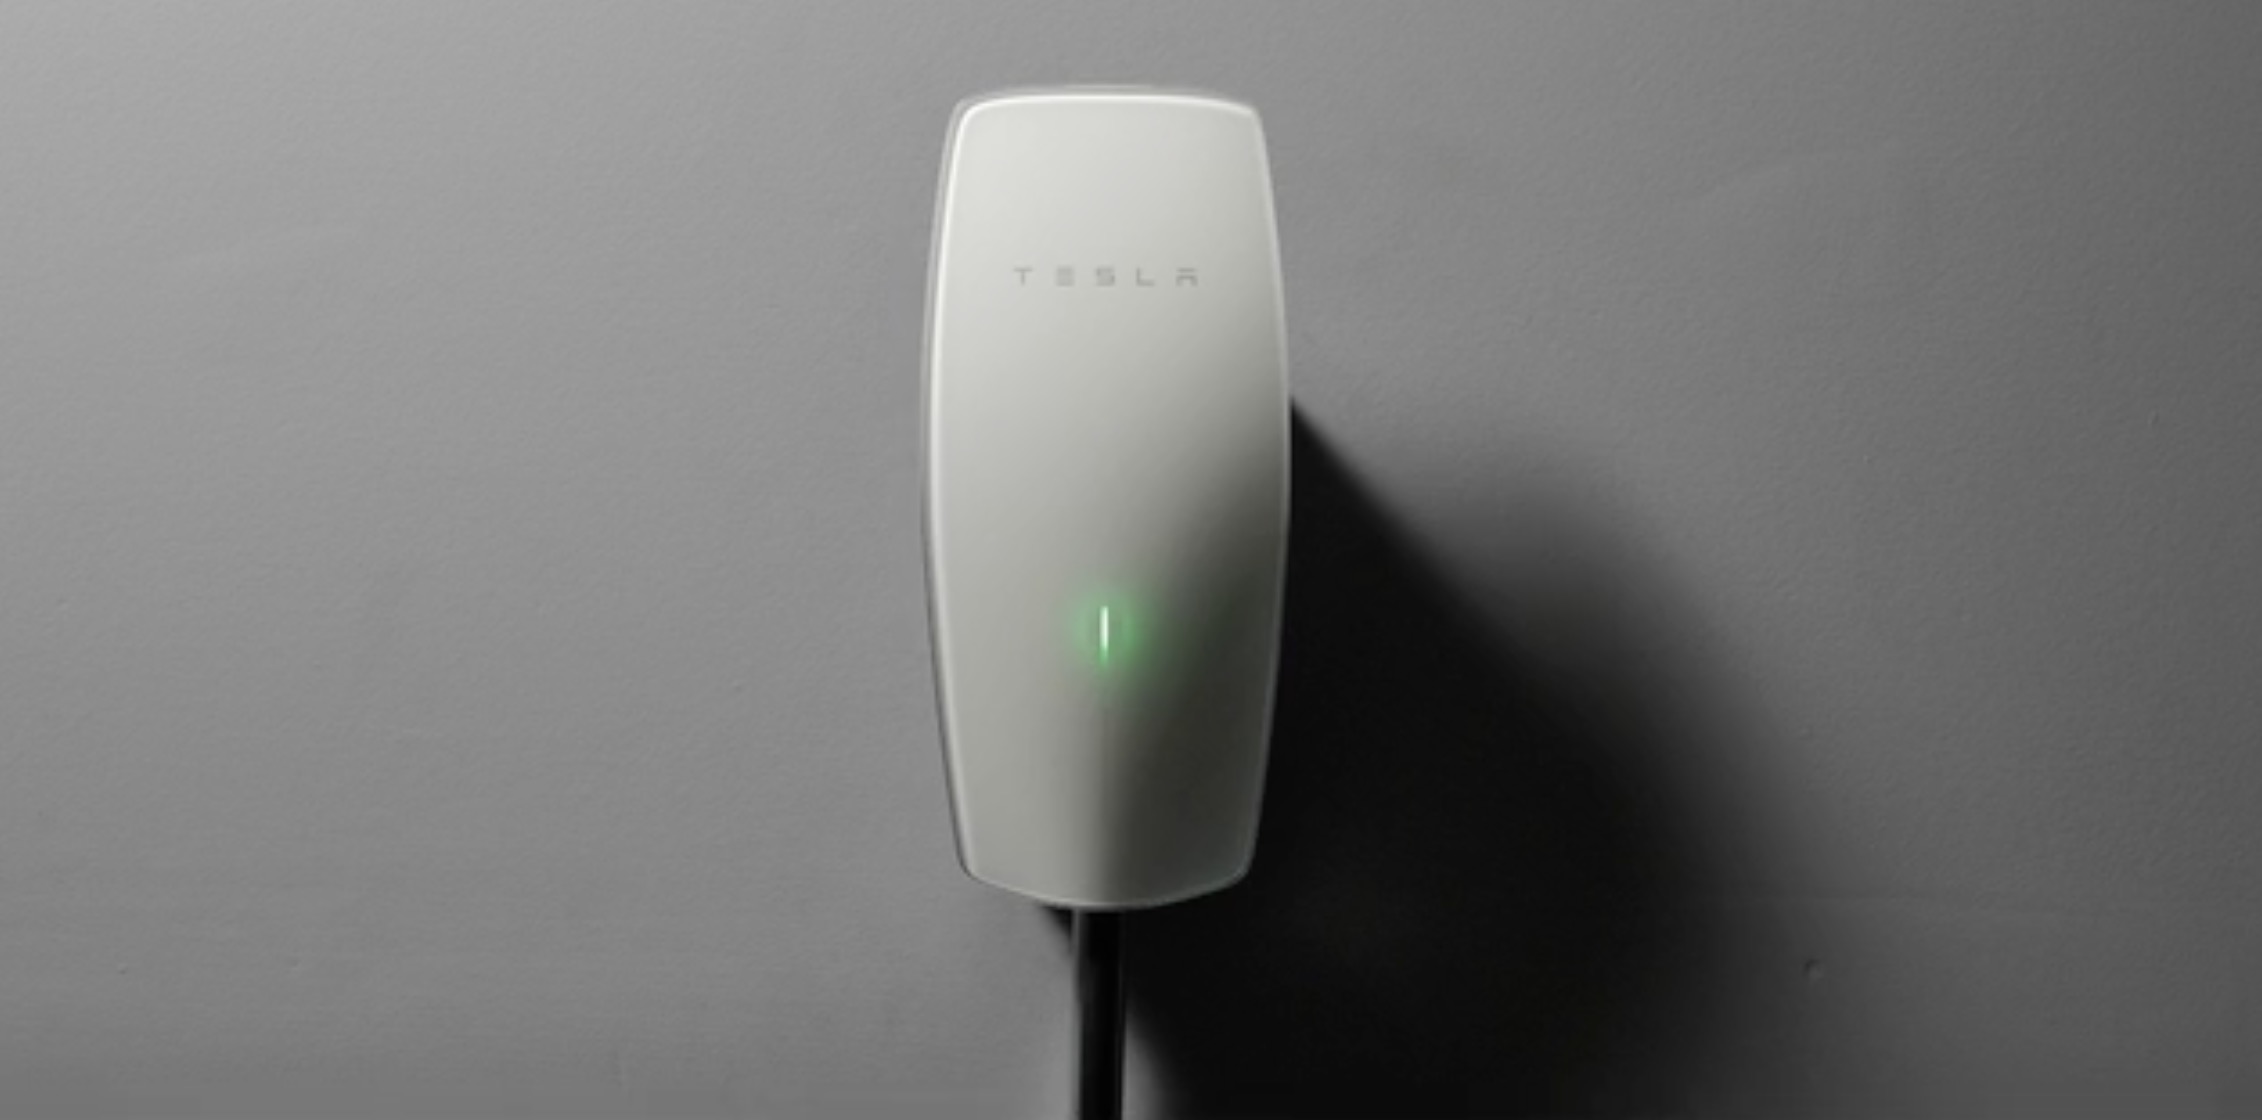 Tesla Wall Connector complimentary with every Tesla order in